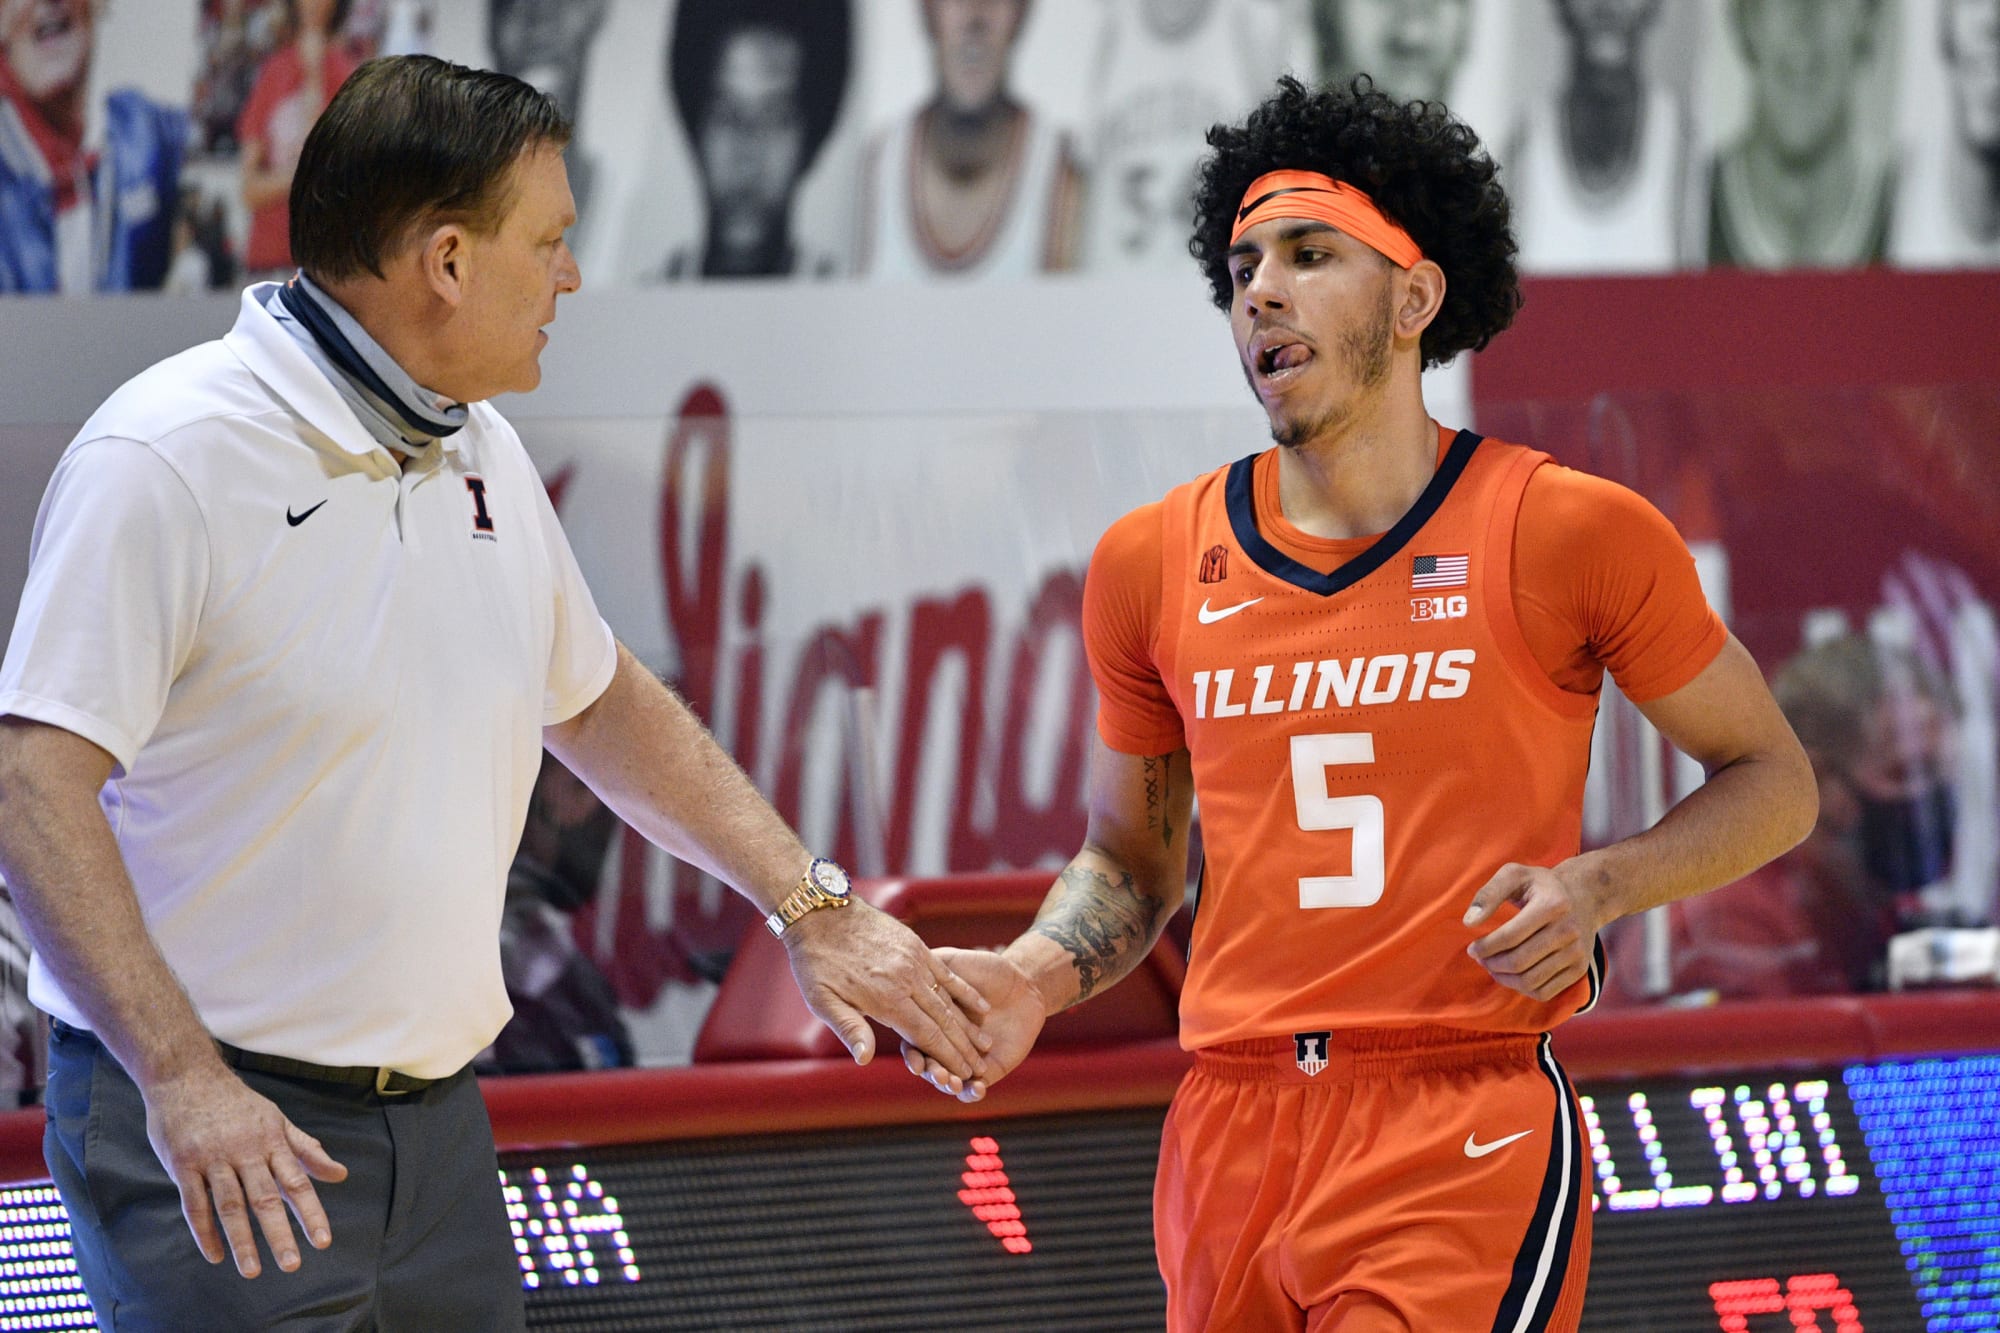 Illinois Basketball Recruiting success unmatched in recent Illini history